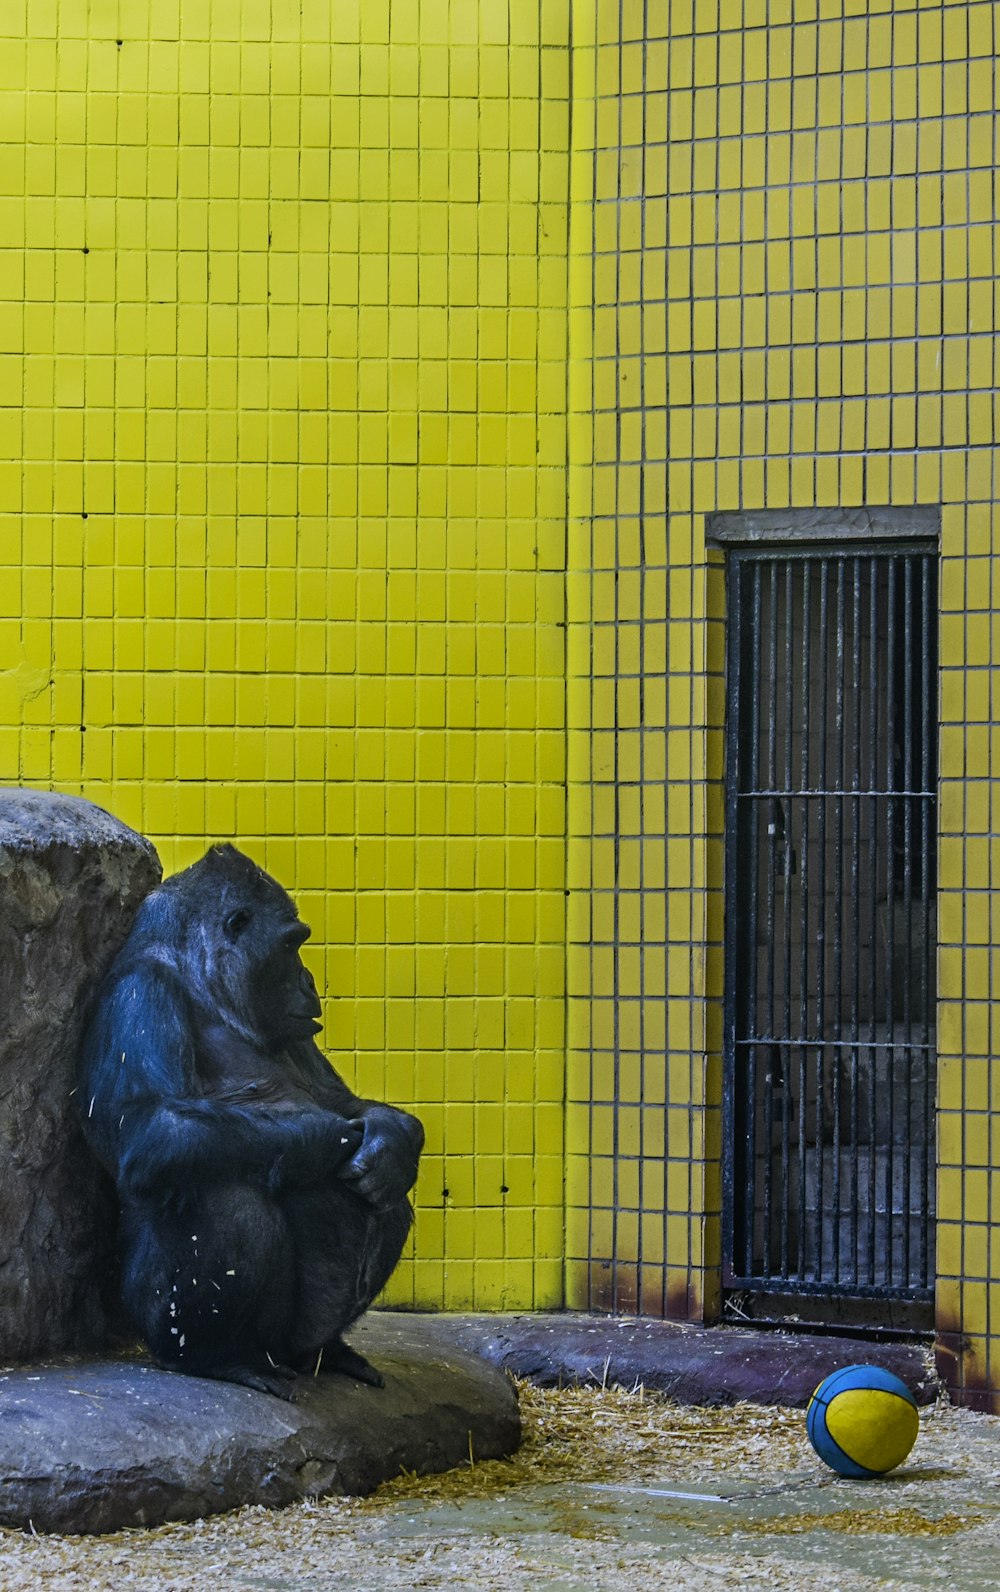 a statue of a gorilla sitting on a rock next to a ball